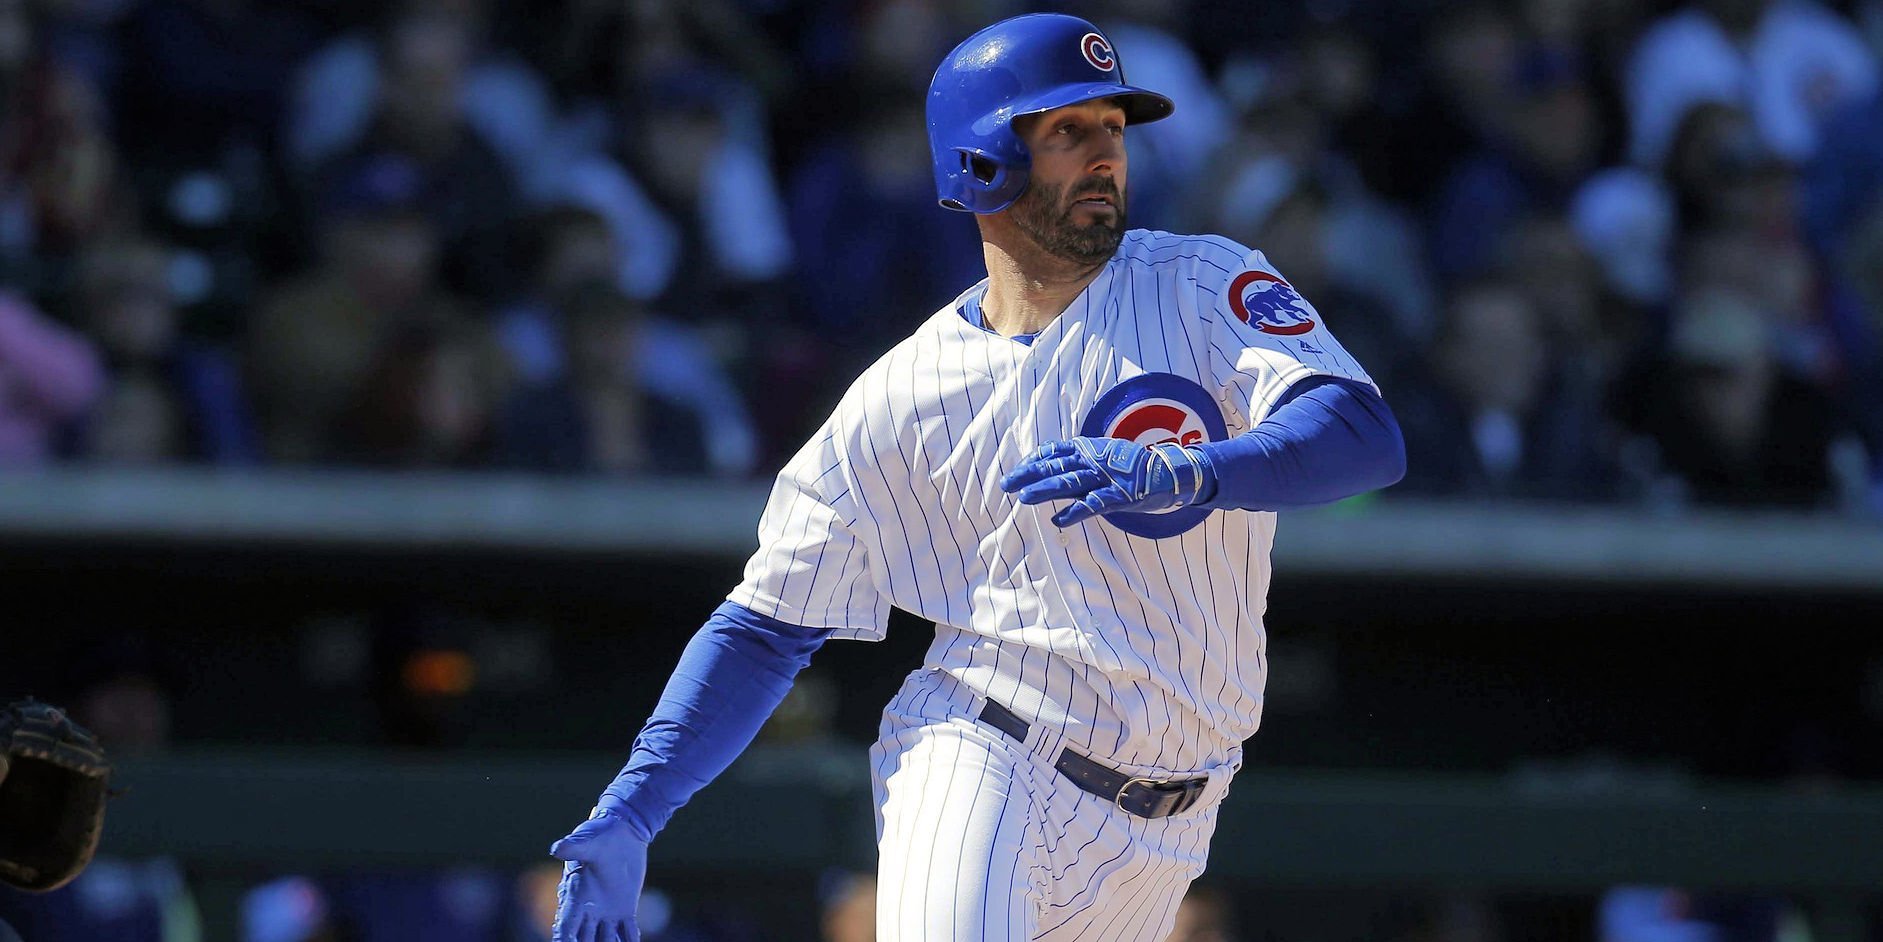 Second baseman Daniel Descalso was called upon to pitch as part of a long night for the Cubs. (Credit: Rick Scuteri-USA TODAY Sports)